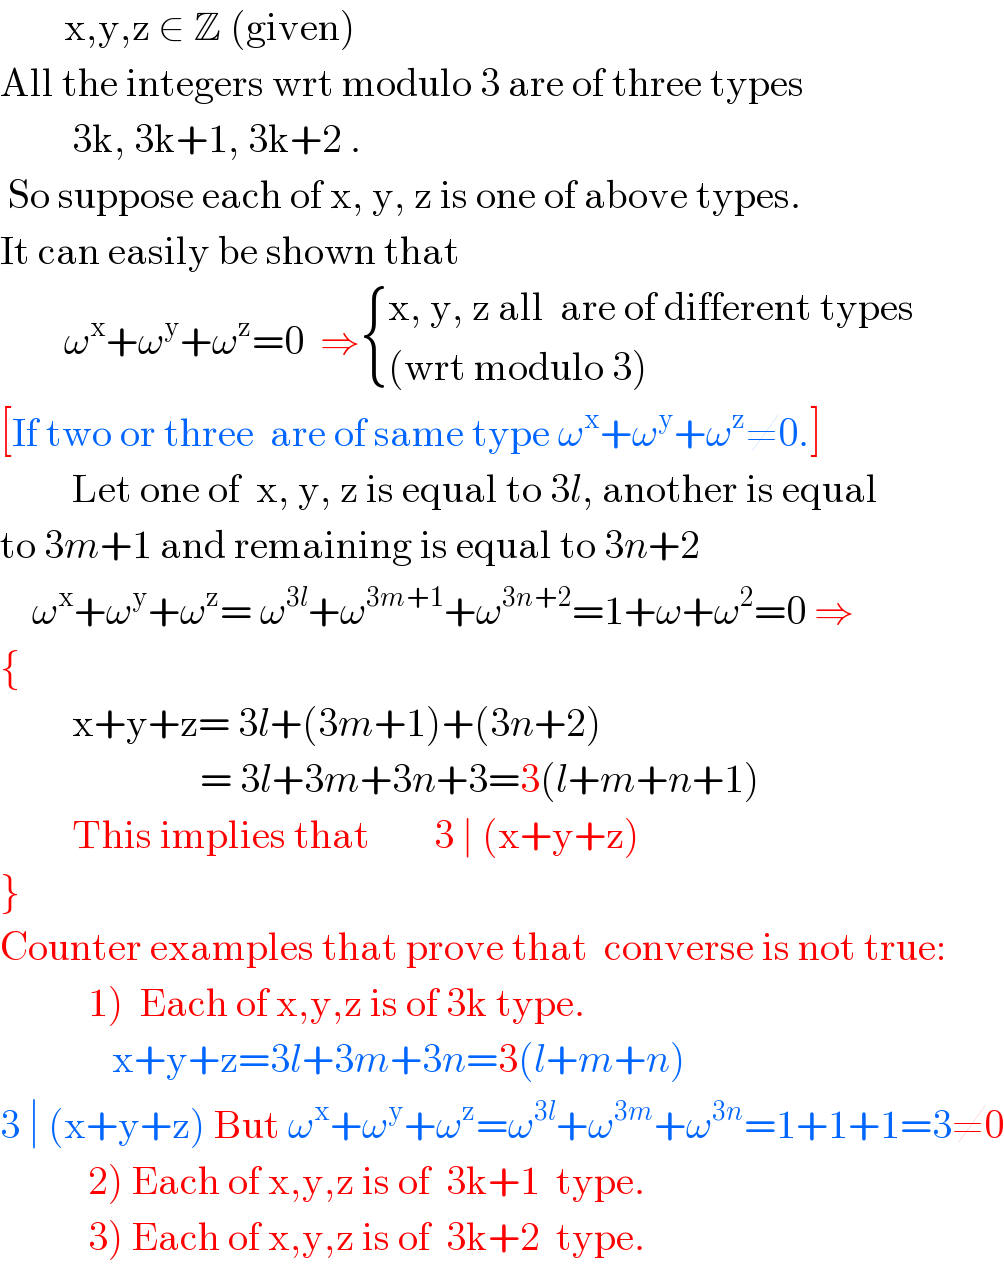         x,y,z ∈ Z (given)  All the integers wrt modulo 3 are of three types            3k, 3k+1, 3k+2 .   So suppose each of x, y, z is one of above types.  It can easily be shown that           ω^x +ω^y +ω^z =0  ⇒ { ((x, y, z all  are of different types)),(((wrt modulo 3))) :}   [If two or three  are of same type ω^x +ω^y +ω^z ≠0.]           Let one of  x, y, z is equal to 3l, another is equal  to 3m+1 and remaining is equal to 3n+2      ω^x +ω^y +ω^z = ω^(3l) +ω^(3m+1) +ω^(3n+2) =1+ω+ω^2 =0 ⇒  {           x+y+z= 3l+(3m+1)+(3n+2)                           = 3l+3m+3n+3=3(l+m+n+1)           This implies that        3 ∣ (x+y+z)                }  Counter examples that prove that  converse is not true:             1)  Each of x,y,z is of 3k type.                x+y+z=3l+3m+3n=3(l+m+n)  3 ∣ (x+y+z) But ω^x +ω^y +ω^z =ω^(3l) +ω^(3m) +ω^(3n) =1+1+1=3≠0             2) Each of x,y,z is of  3k+1  type.             3) Each of x,y,z is of  3k+2  type.  